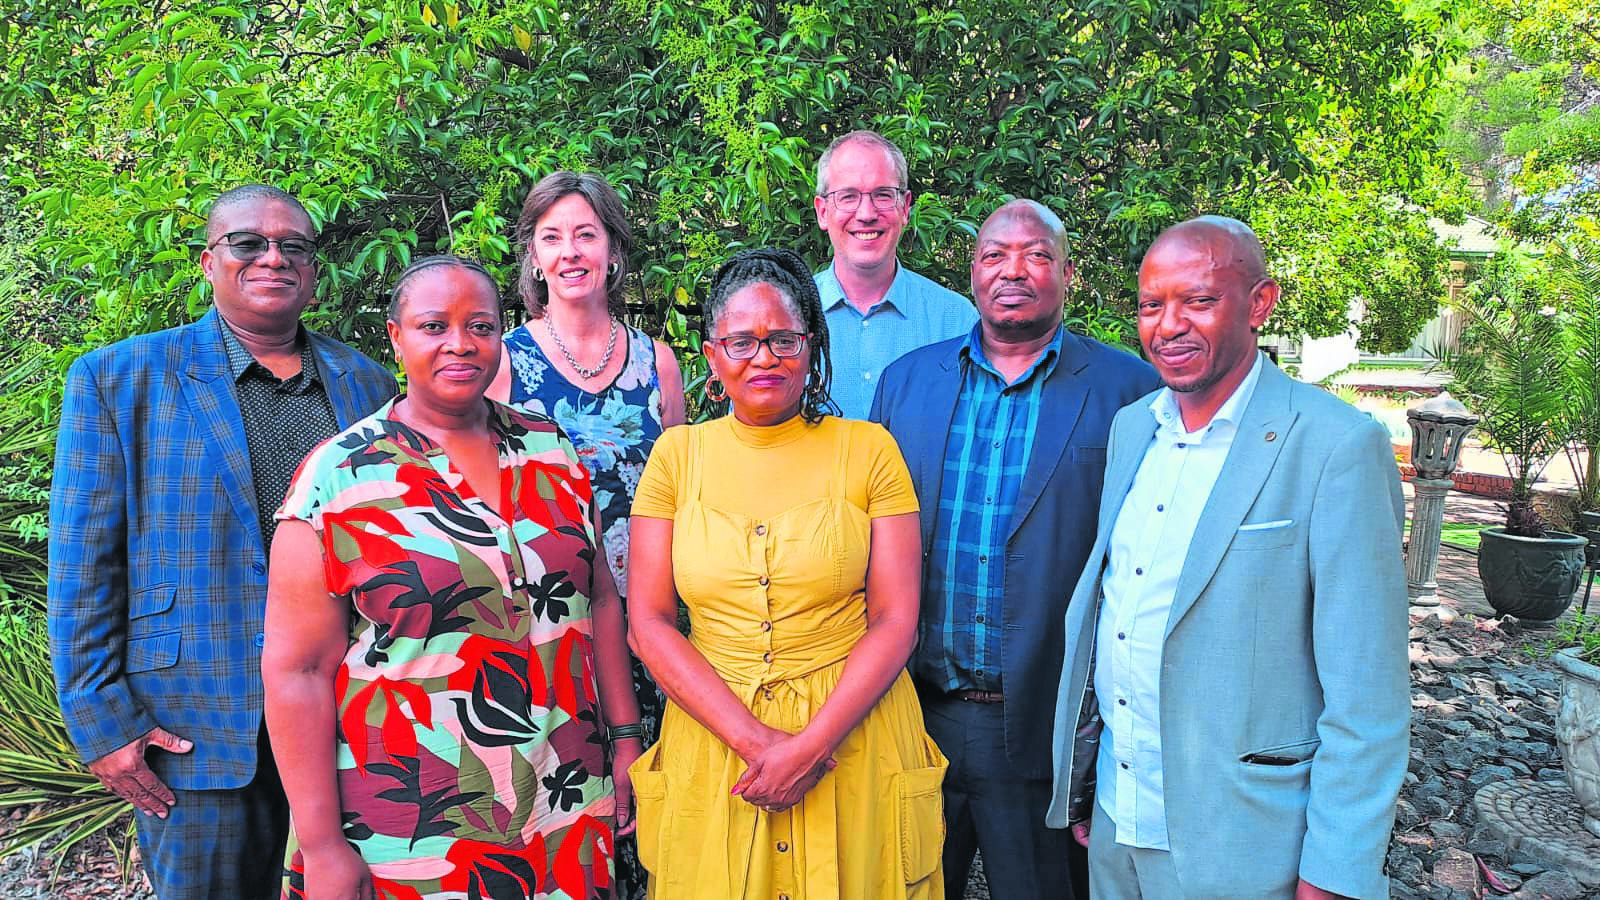 A memorandum of understanding signed in February 2020 between the Free State Depart­ment of Health and the University of the Free State (UFS) was taken stock of at a consultative meeting on Wednesday (18/01) – and it was found to be yielding results. The rendering of quality tertiary health education is one of the many priorities set out in the memorandum. At the meeting are, from the left, Godfrey Mahlatsi (head of the Department of Health), Dr Nomakhuwa Elizabeth Tabane (head of paediatrics and child health in the UFS Faculty of Health Sciences), Dr Engela van Staden (academic vice-rector), Prof. Joyce Tsoka-Gwegweni (acting dean of the faculty), Prof. Nicholas Pearce (head of the UFS School of Clinical Medicine), Dr Eddie Mzangwa (chief executive officer of the Universitas Academic Hospital) and Papi Maarohanye (deputy director general of clinical health service at the department). Photo: Supplied